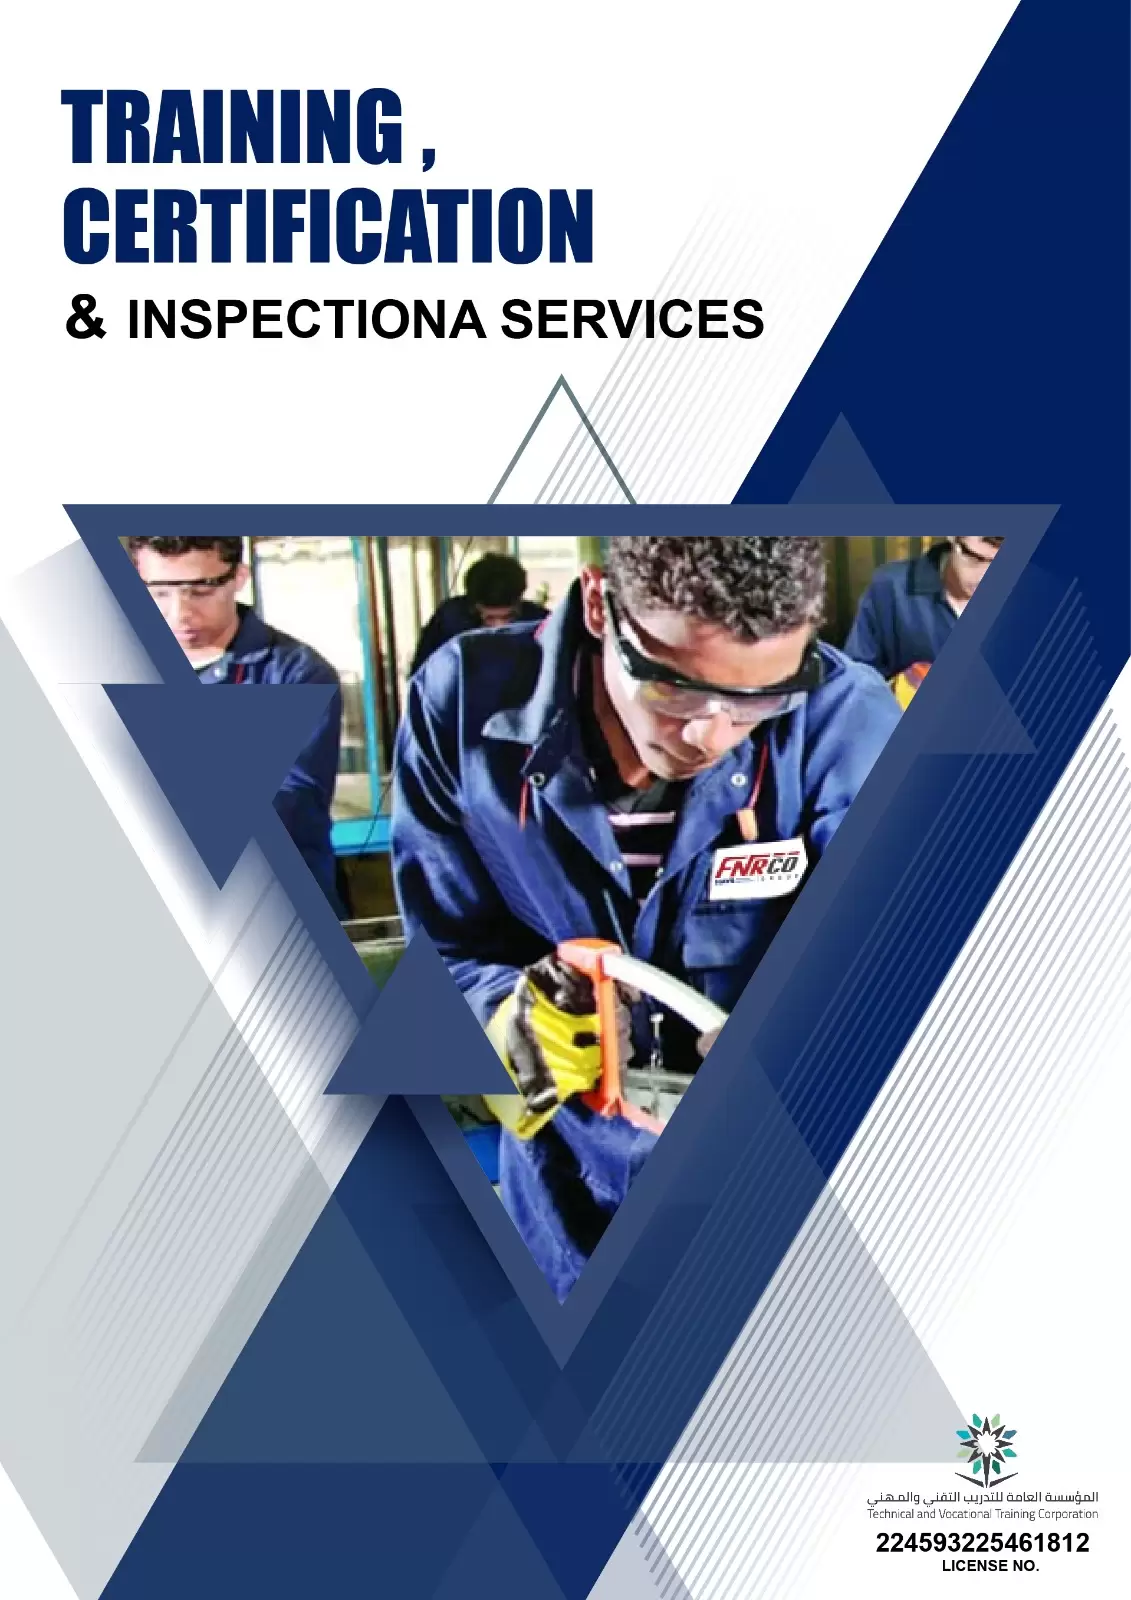 Training, Certification & Inspection Services